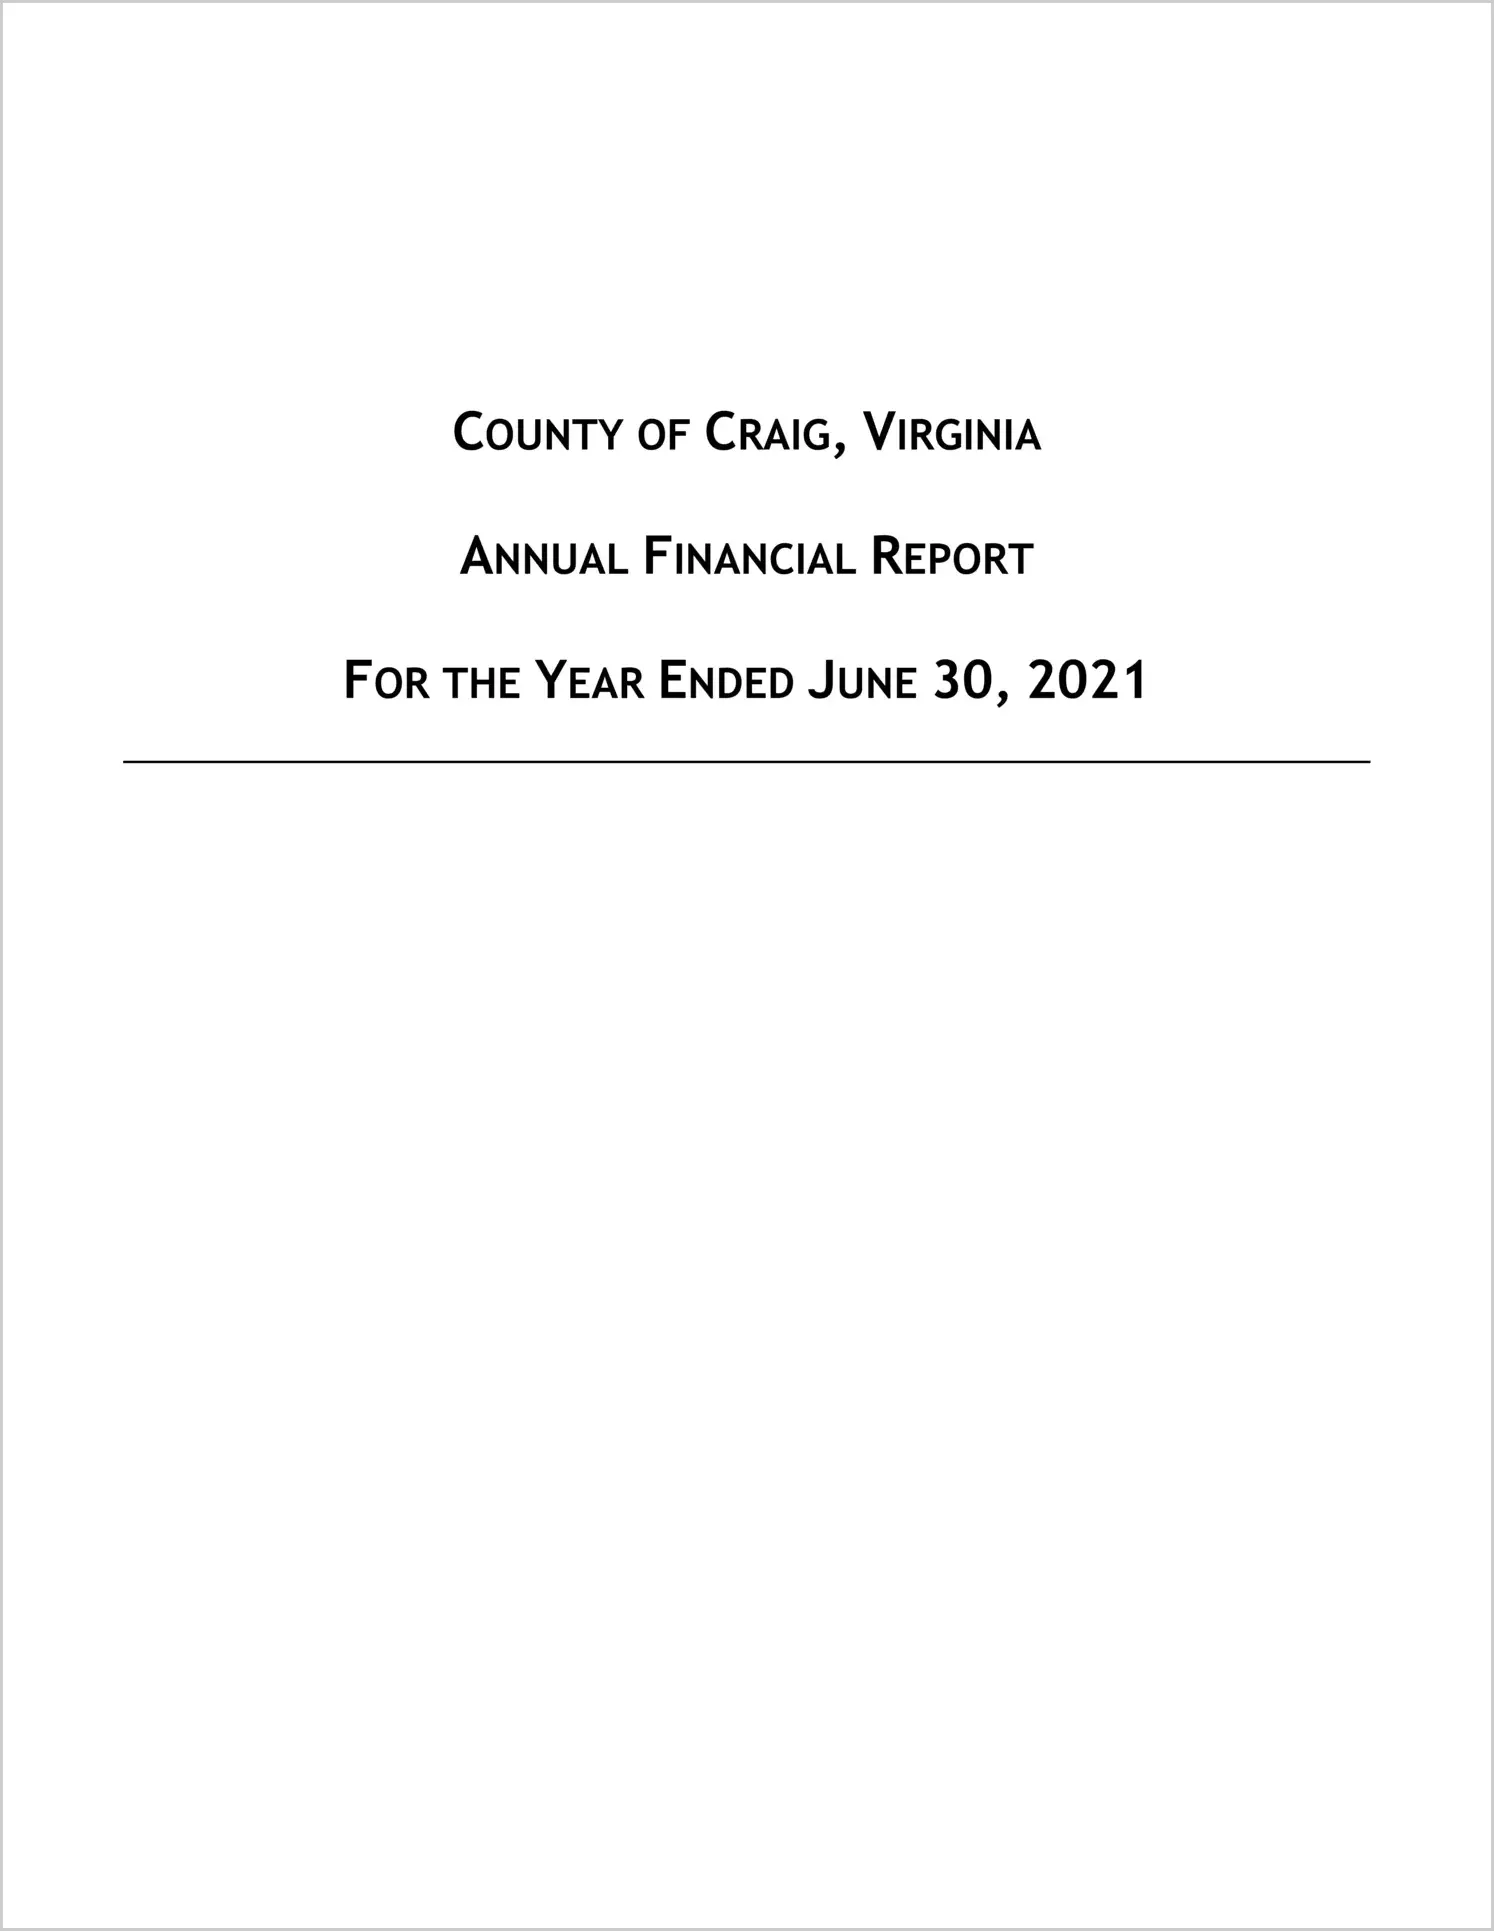 2021 Annual Financial Report for County of Craig